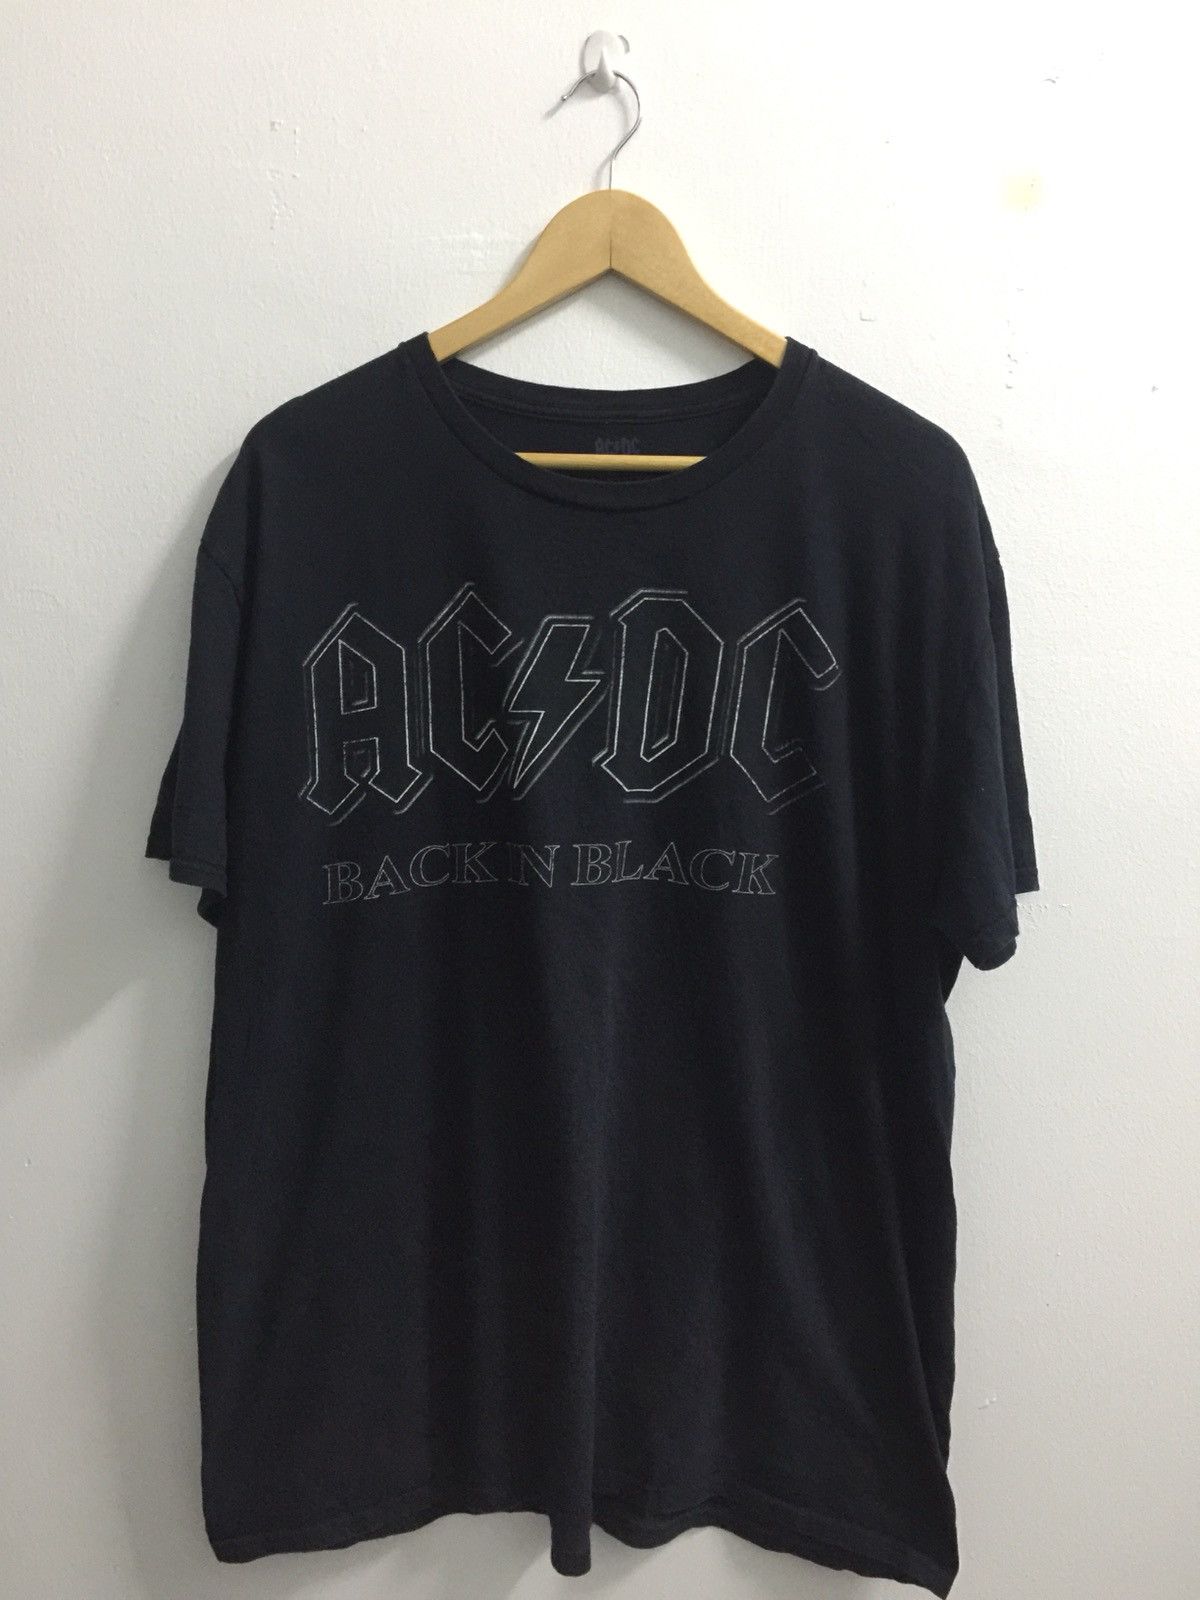 Band Tees ACDC Back In Black Band Tees | Grailed